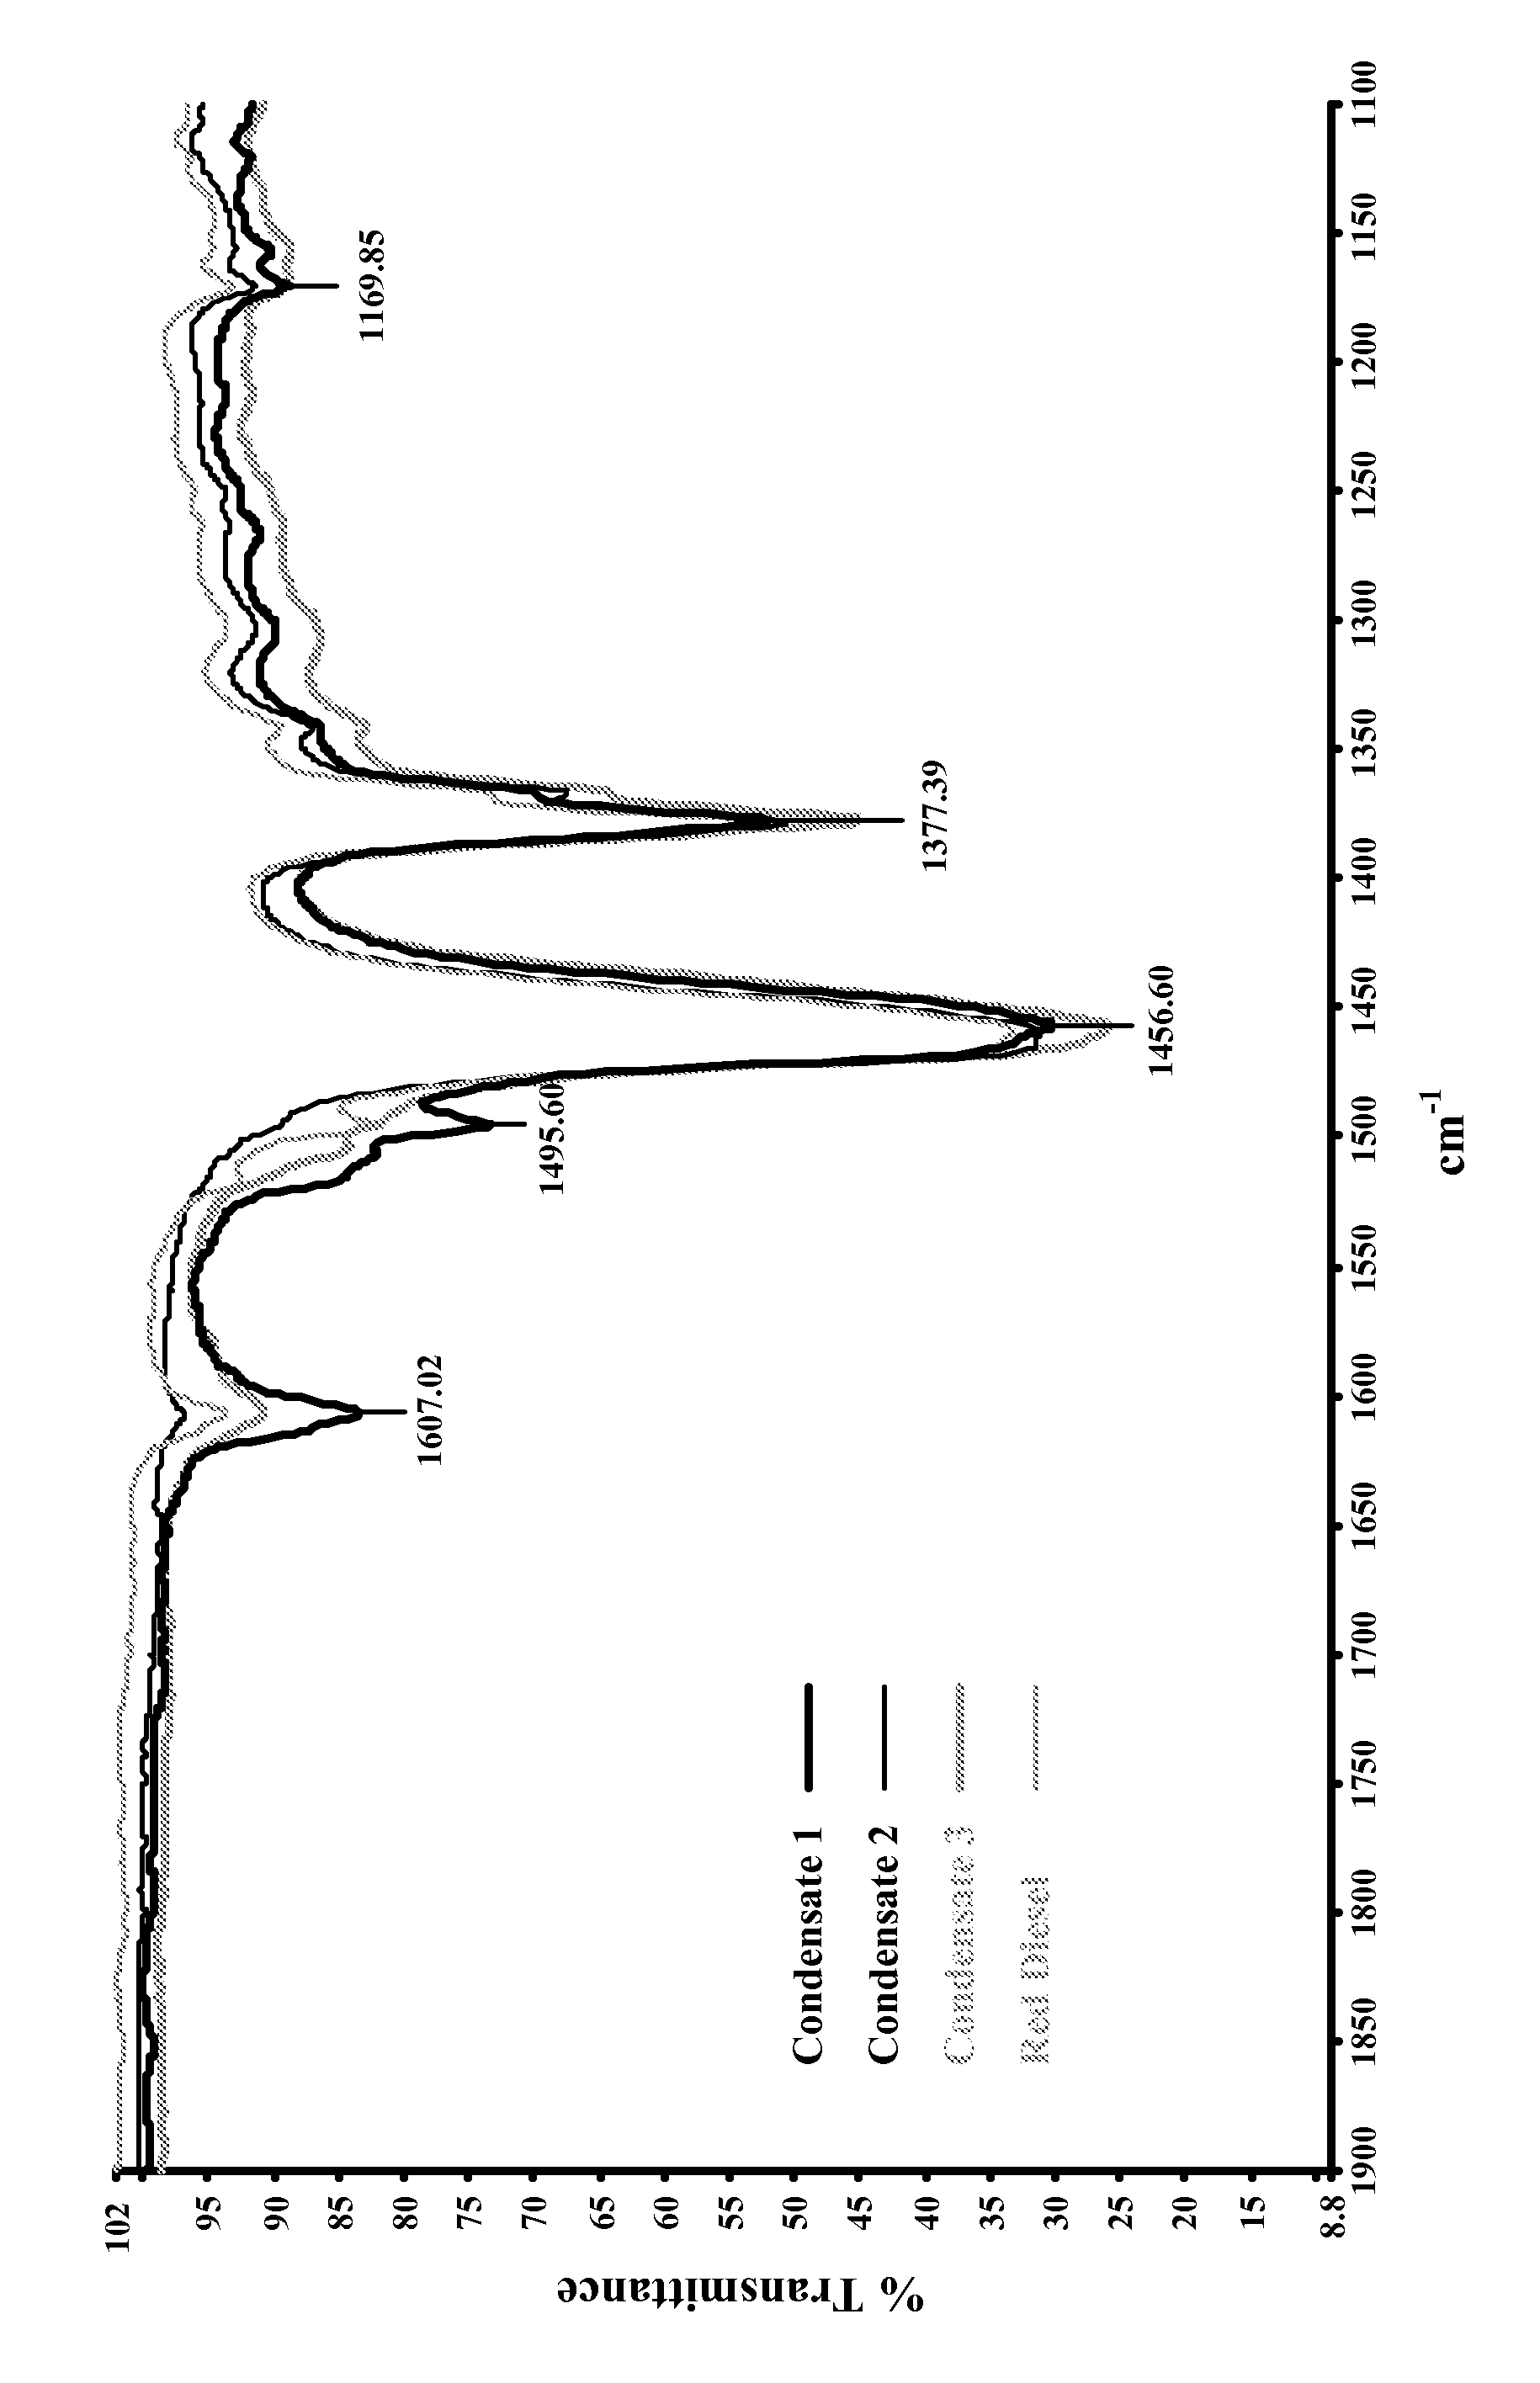 Complementary surfactant compositions and methods for making and using same